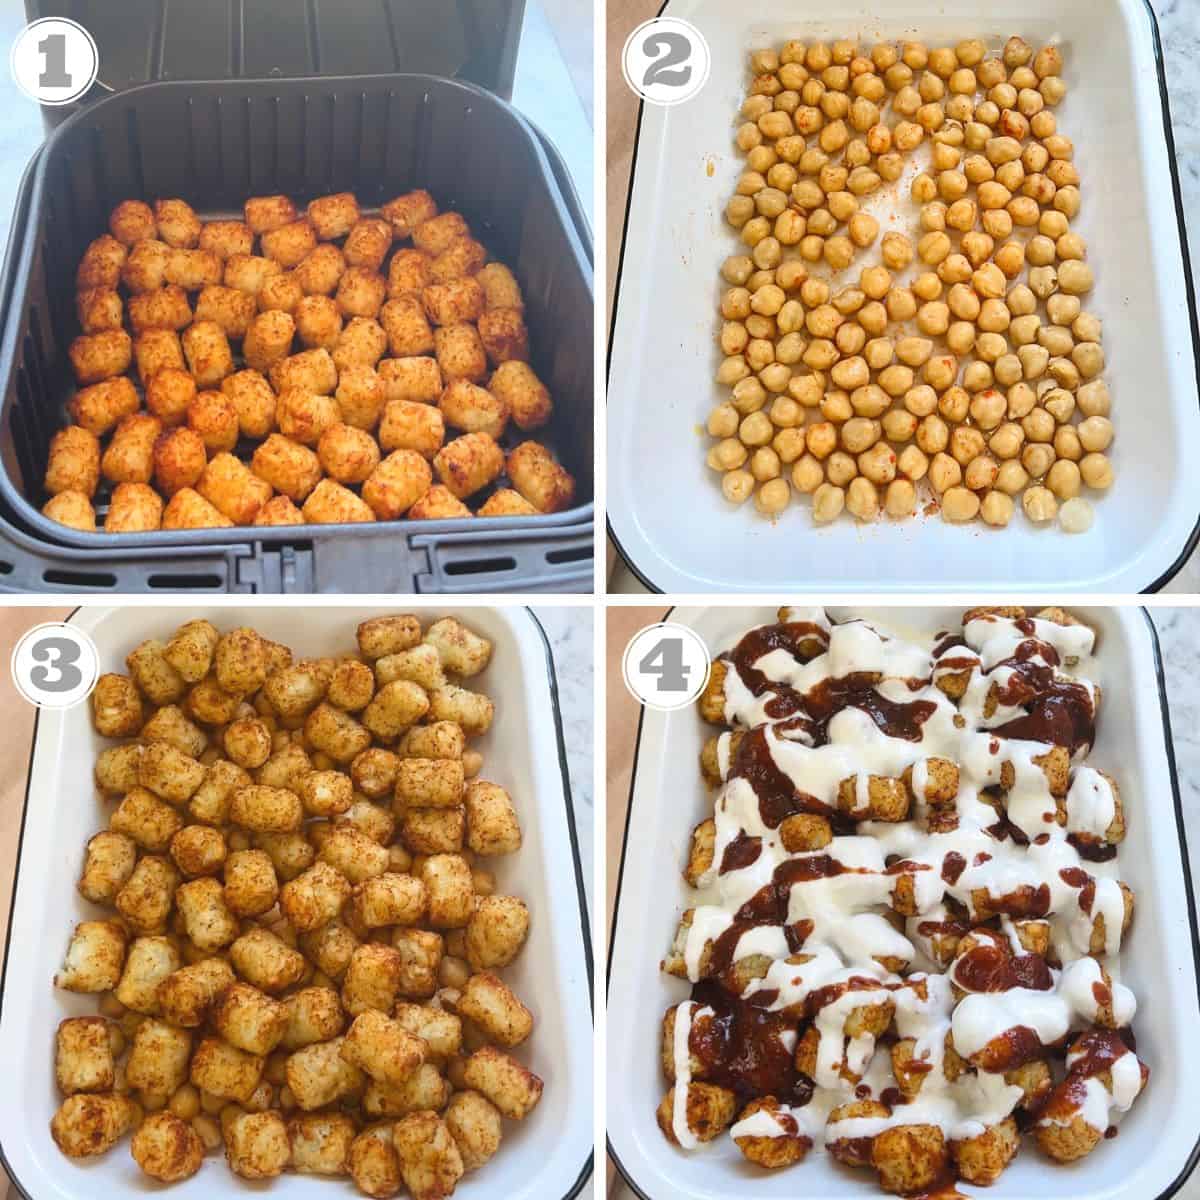 photos one through four showing air fried tater tots and how to assemble aloo chaat 